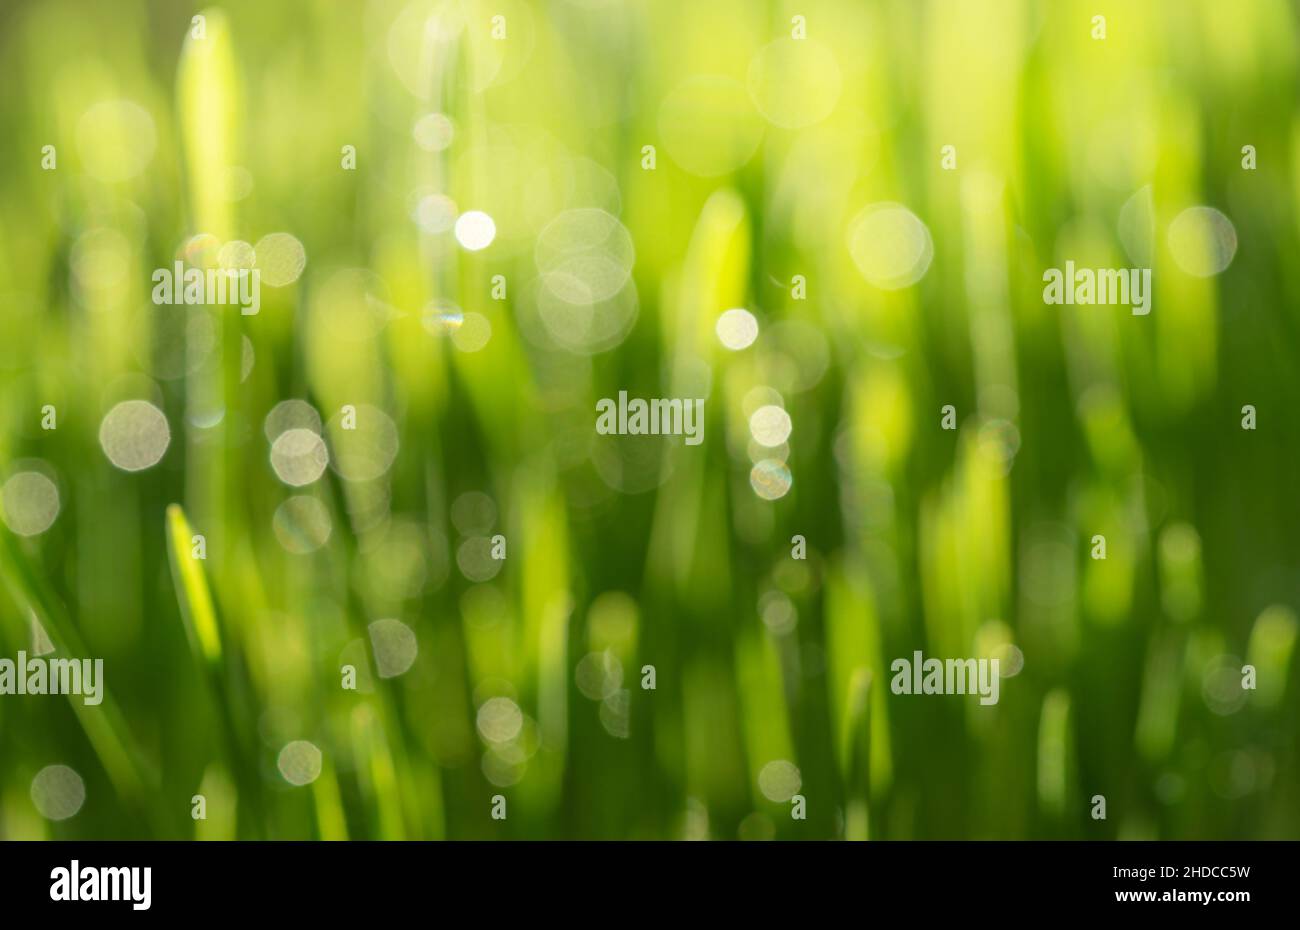 Abstract green natural background with bokeh, selective focus. Stock Photo